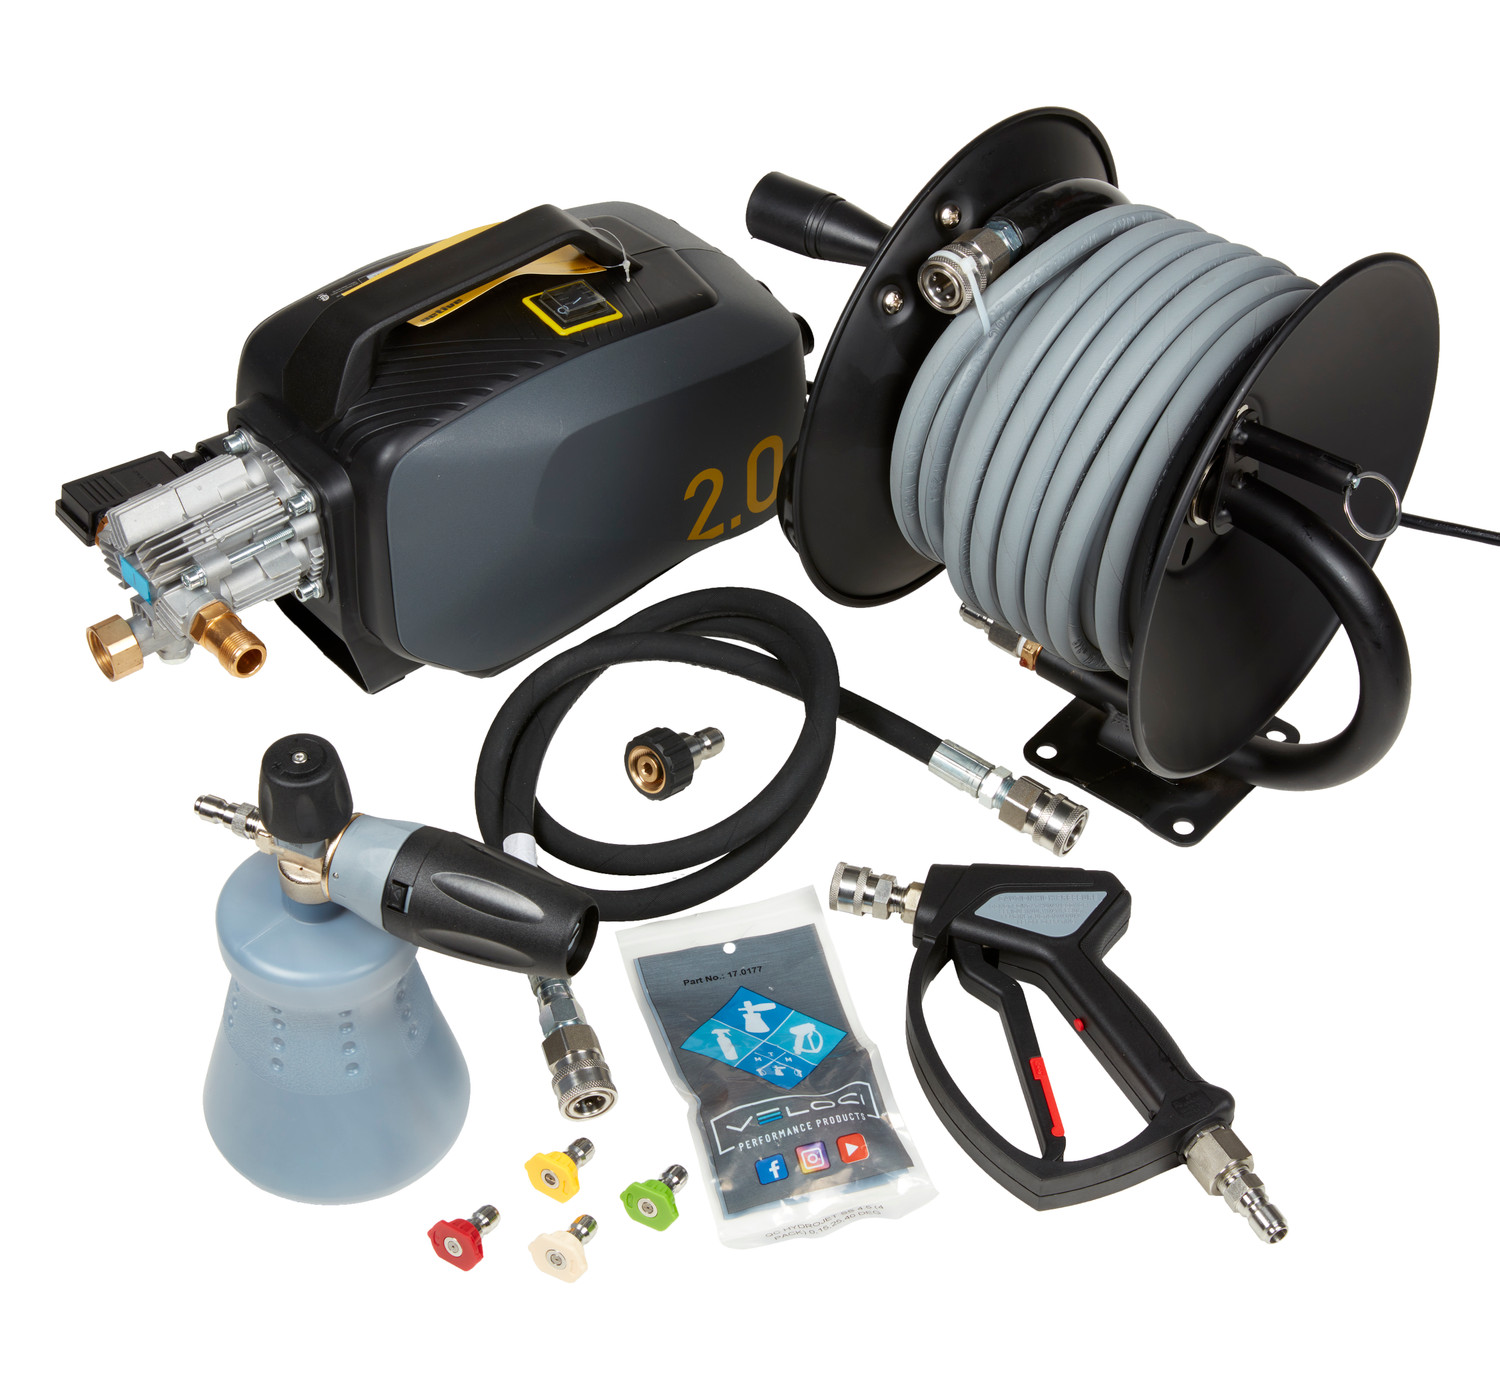 Active 2.0 Pressure Washer, Complete Wall Mount Package, Level 5